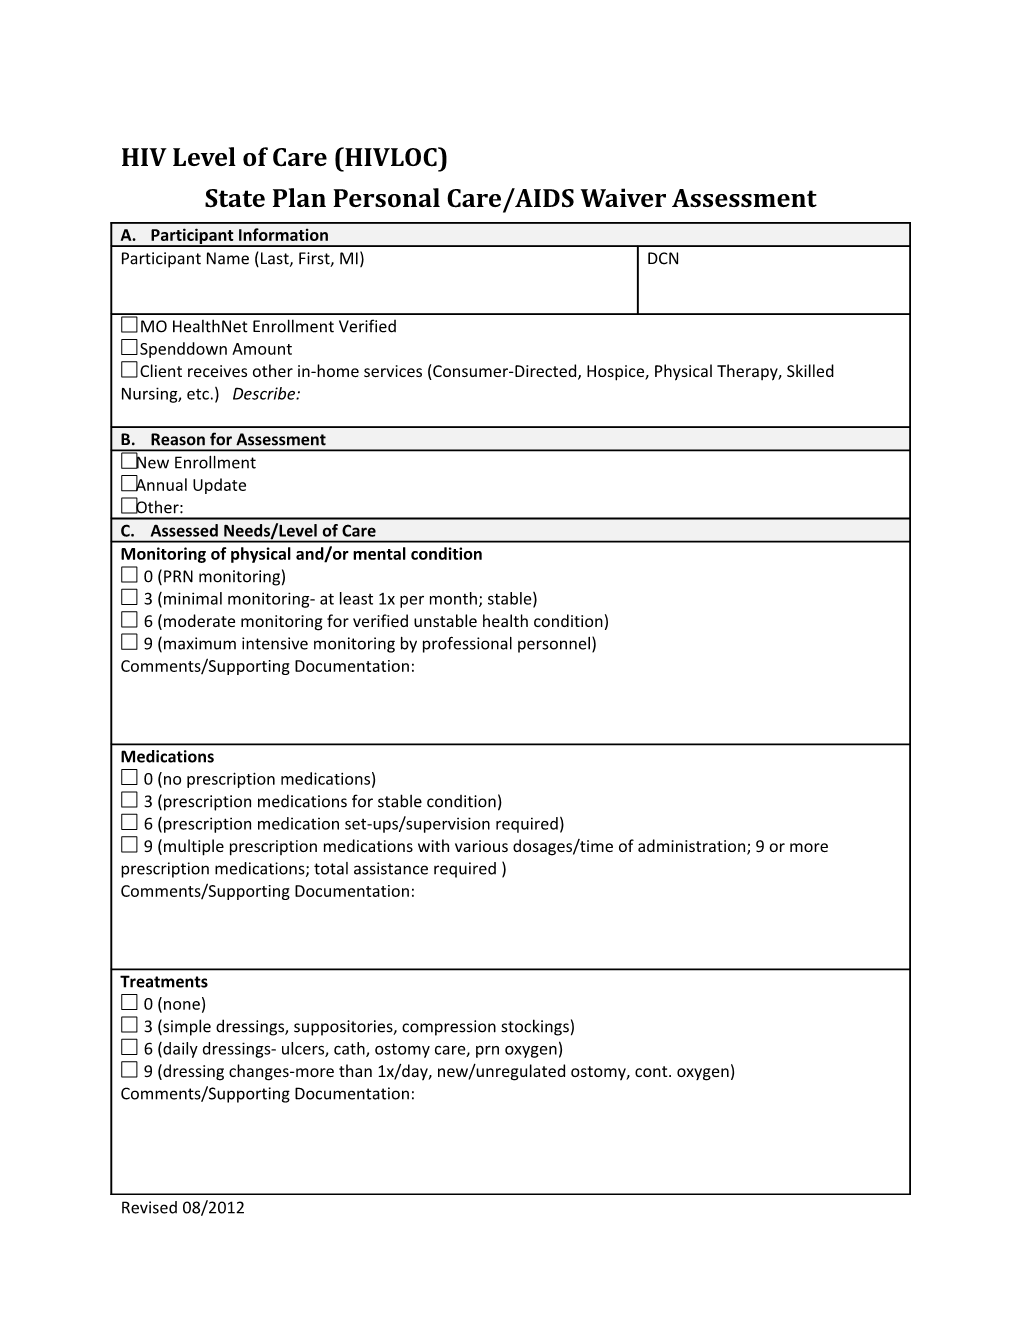 State Plan Personal Care/AIDS Waiver Assessment